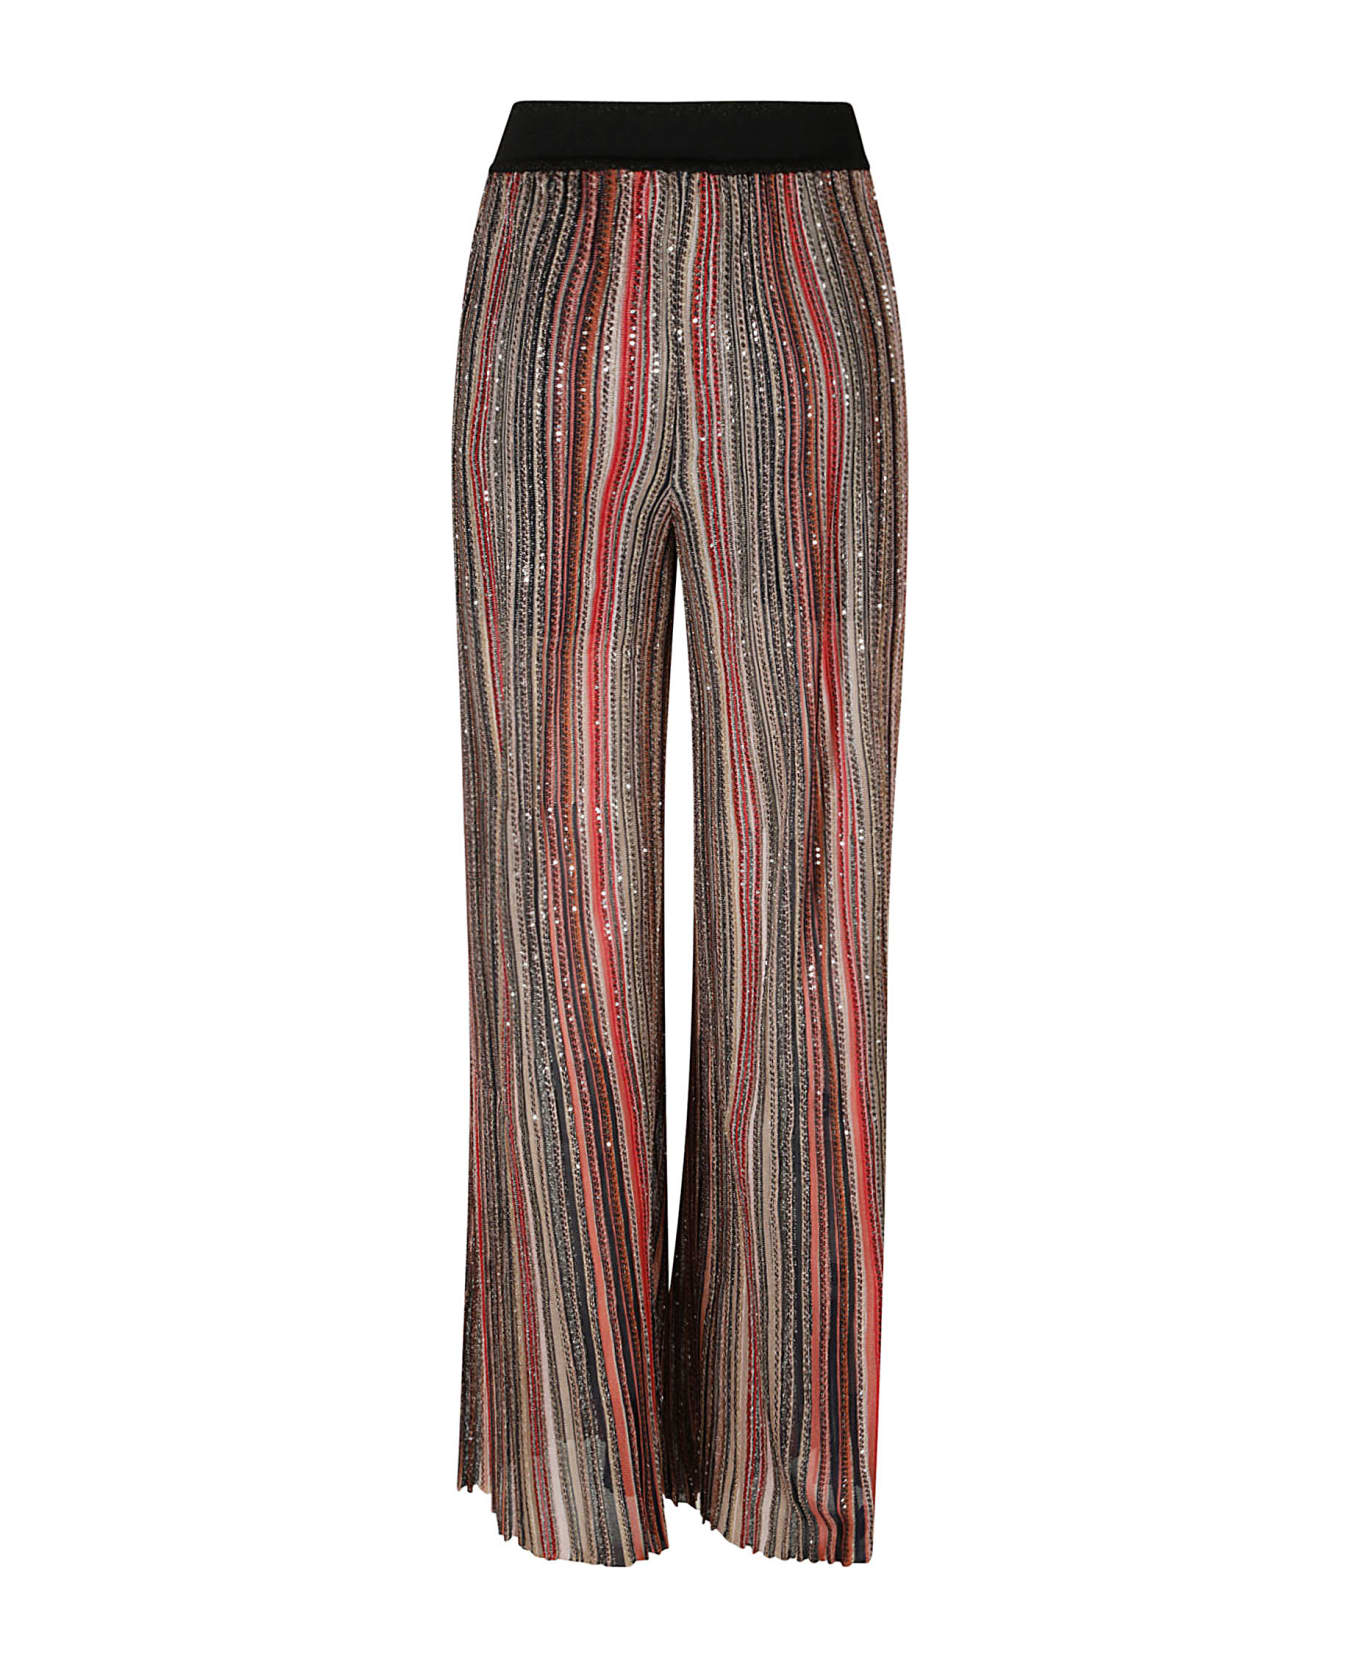 Missoni Embellished Stripe Trousers - mult.blk/rust/bei ボトムス